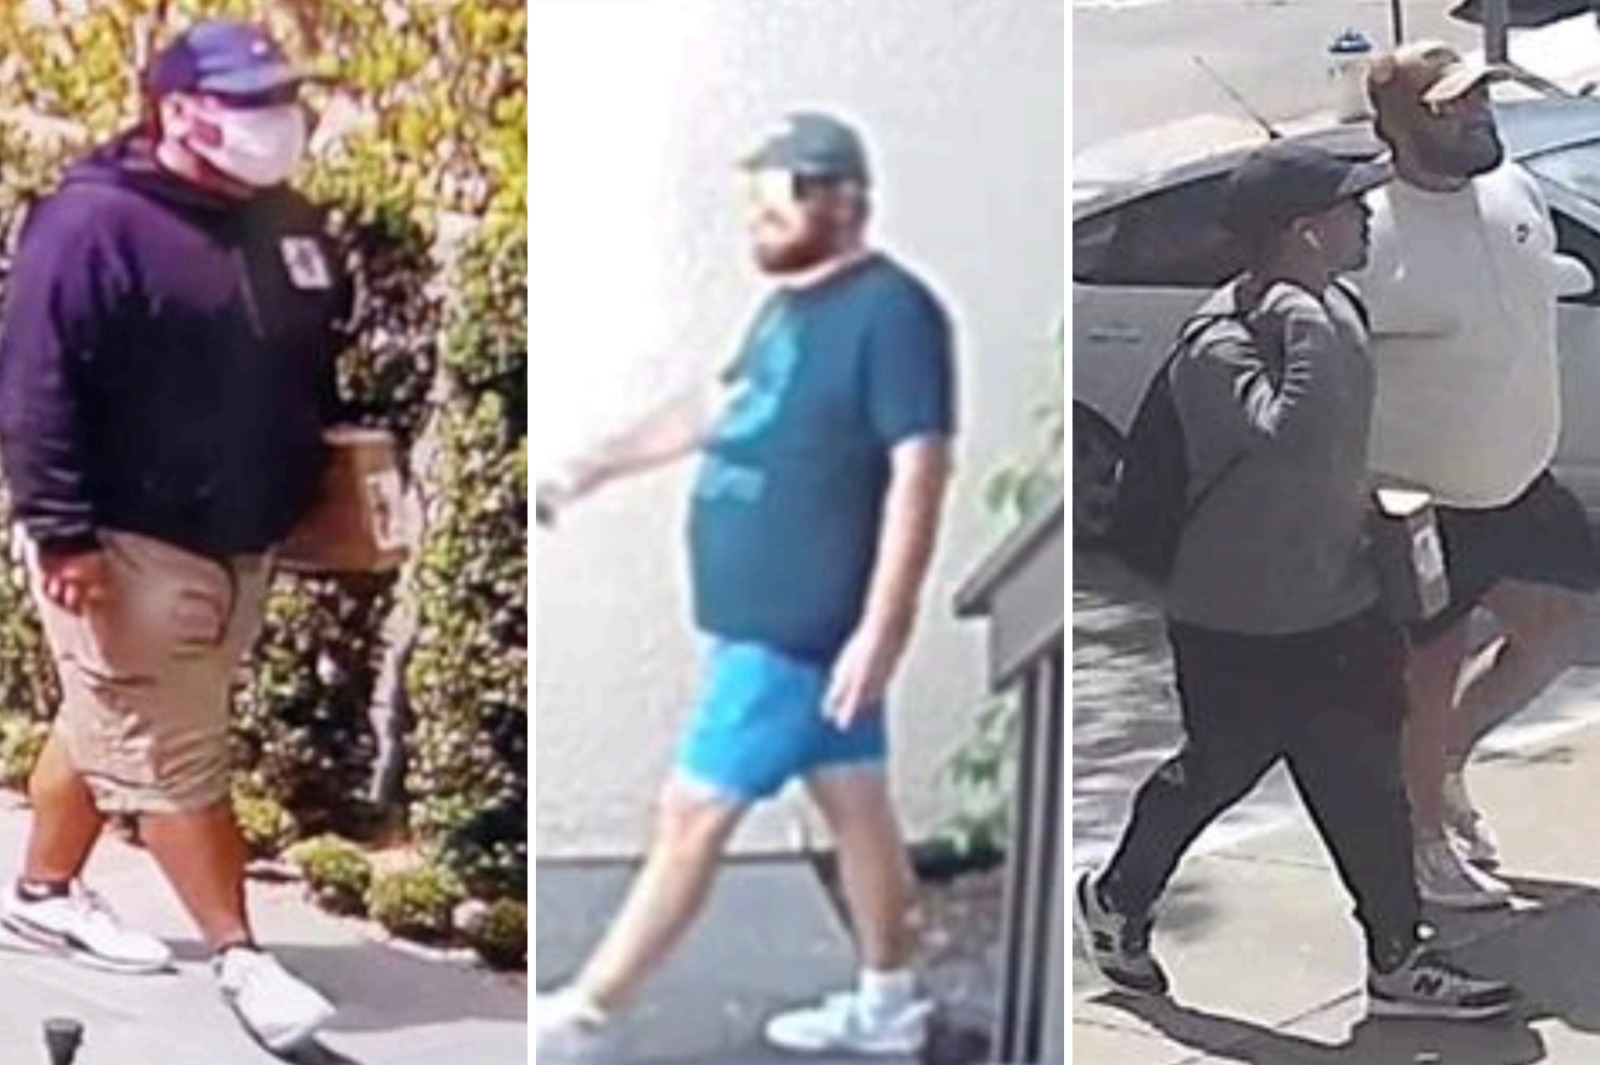 San Mateo police release photos of robbery suspects during July